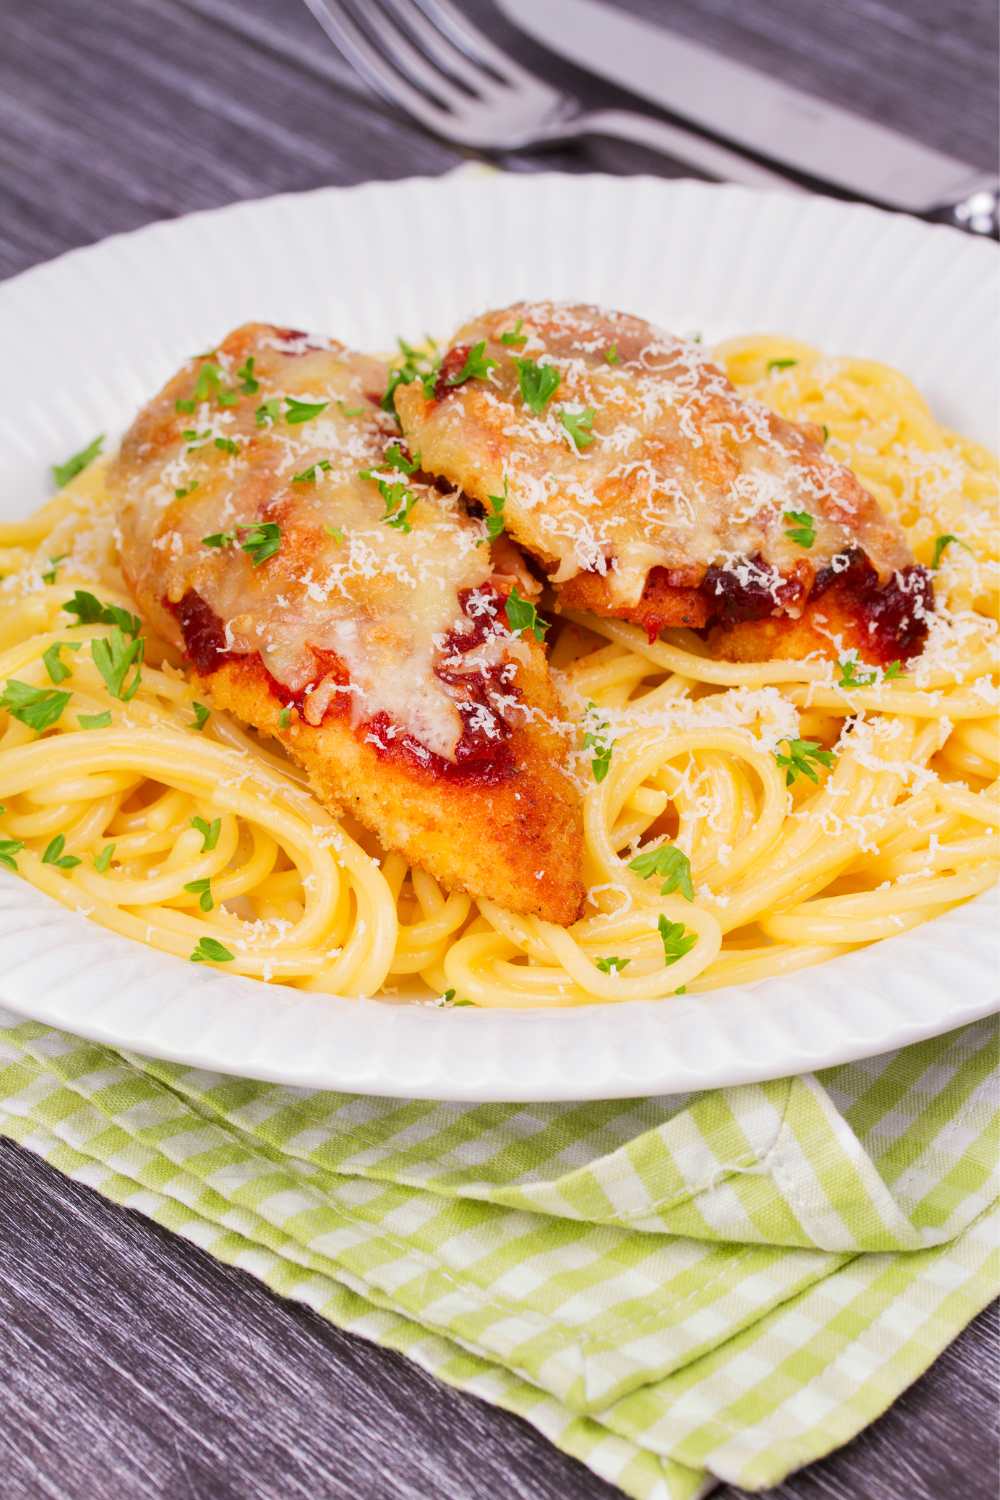 Chicken Breast Recipes With Pasta